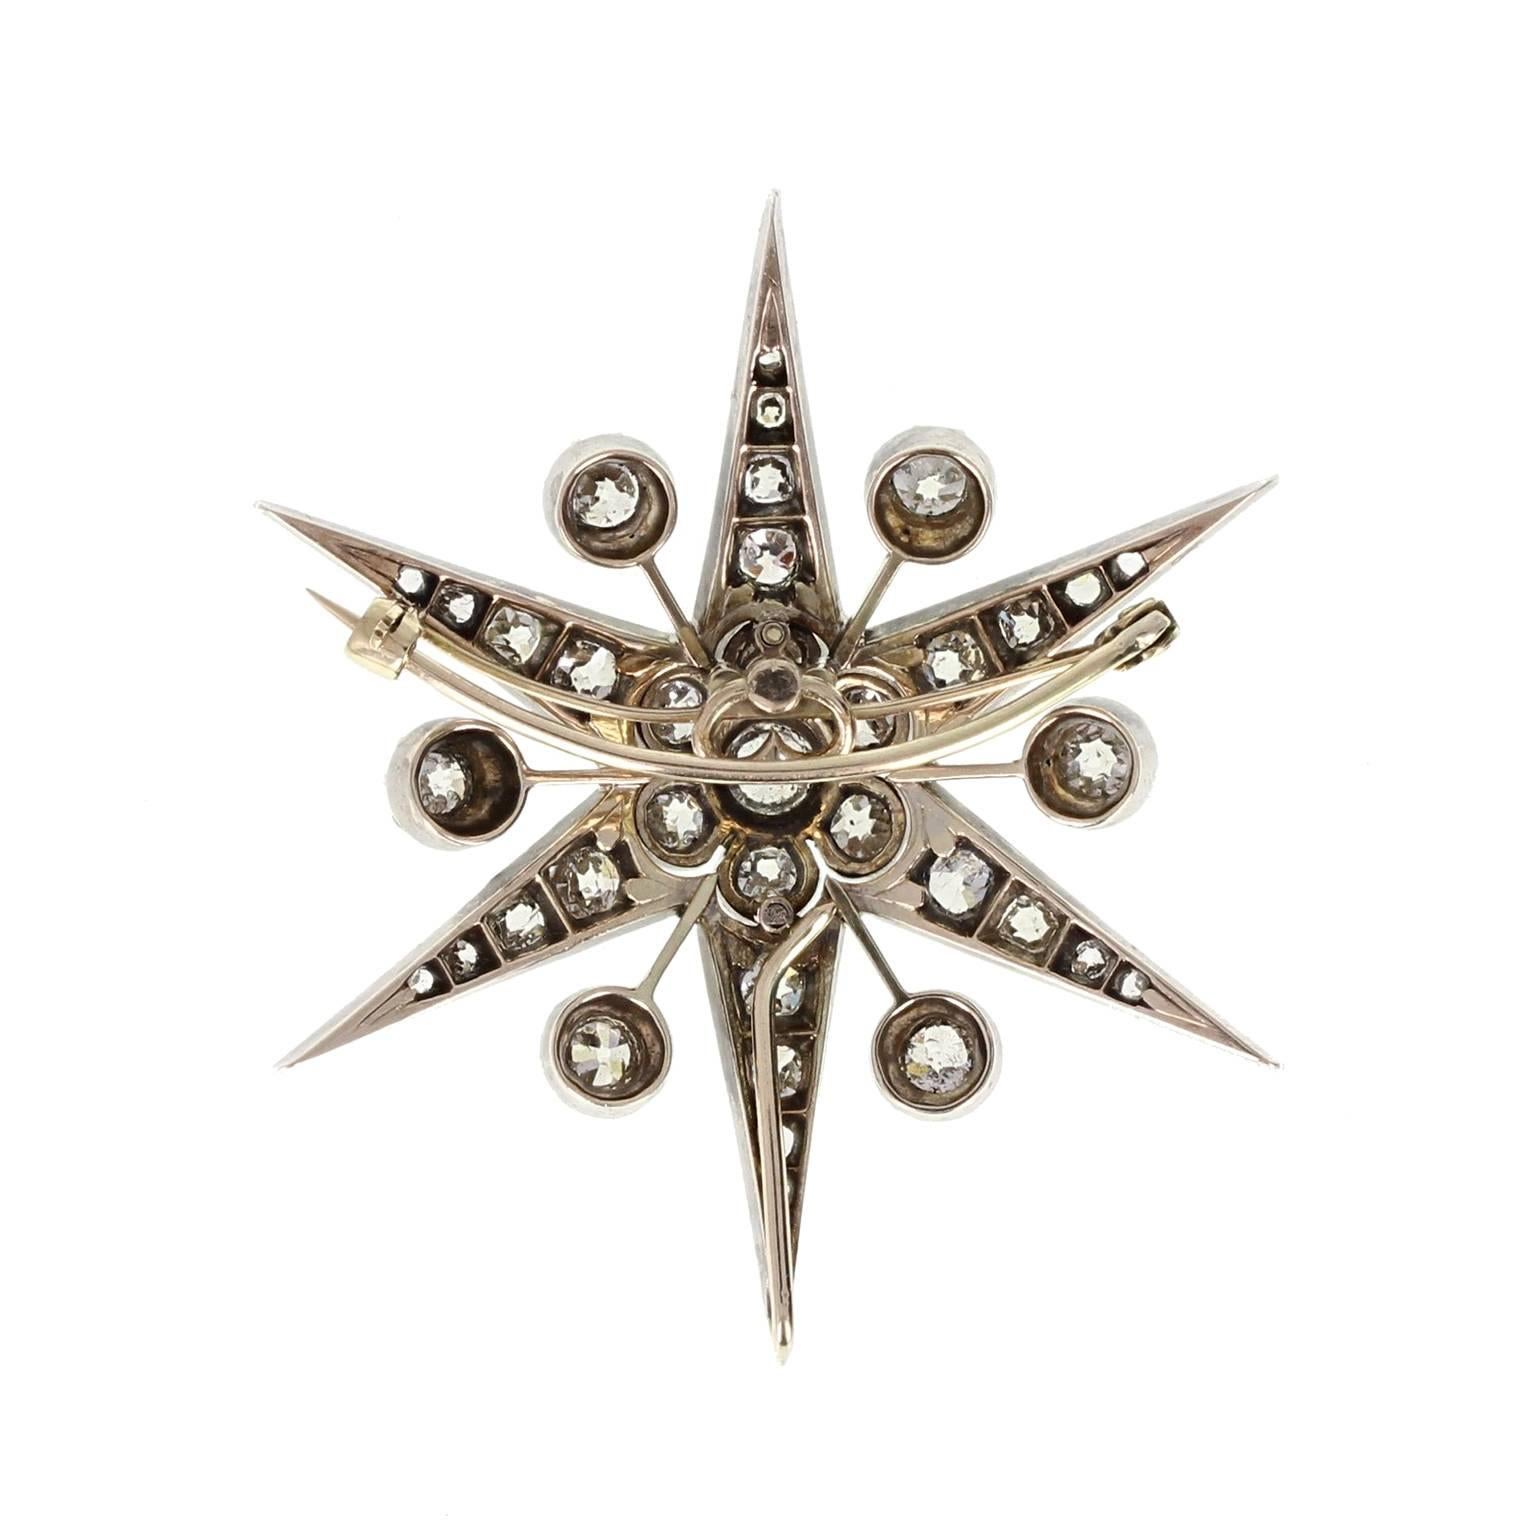 From the height of the Victorian era, with fittings to the rear to wear as either a brooch or a pendant, this six pointed star is formed elegantly from 18 carat gold and silver. Mounted with old mine-cut and rose-cut diamonds graduating in size down